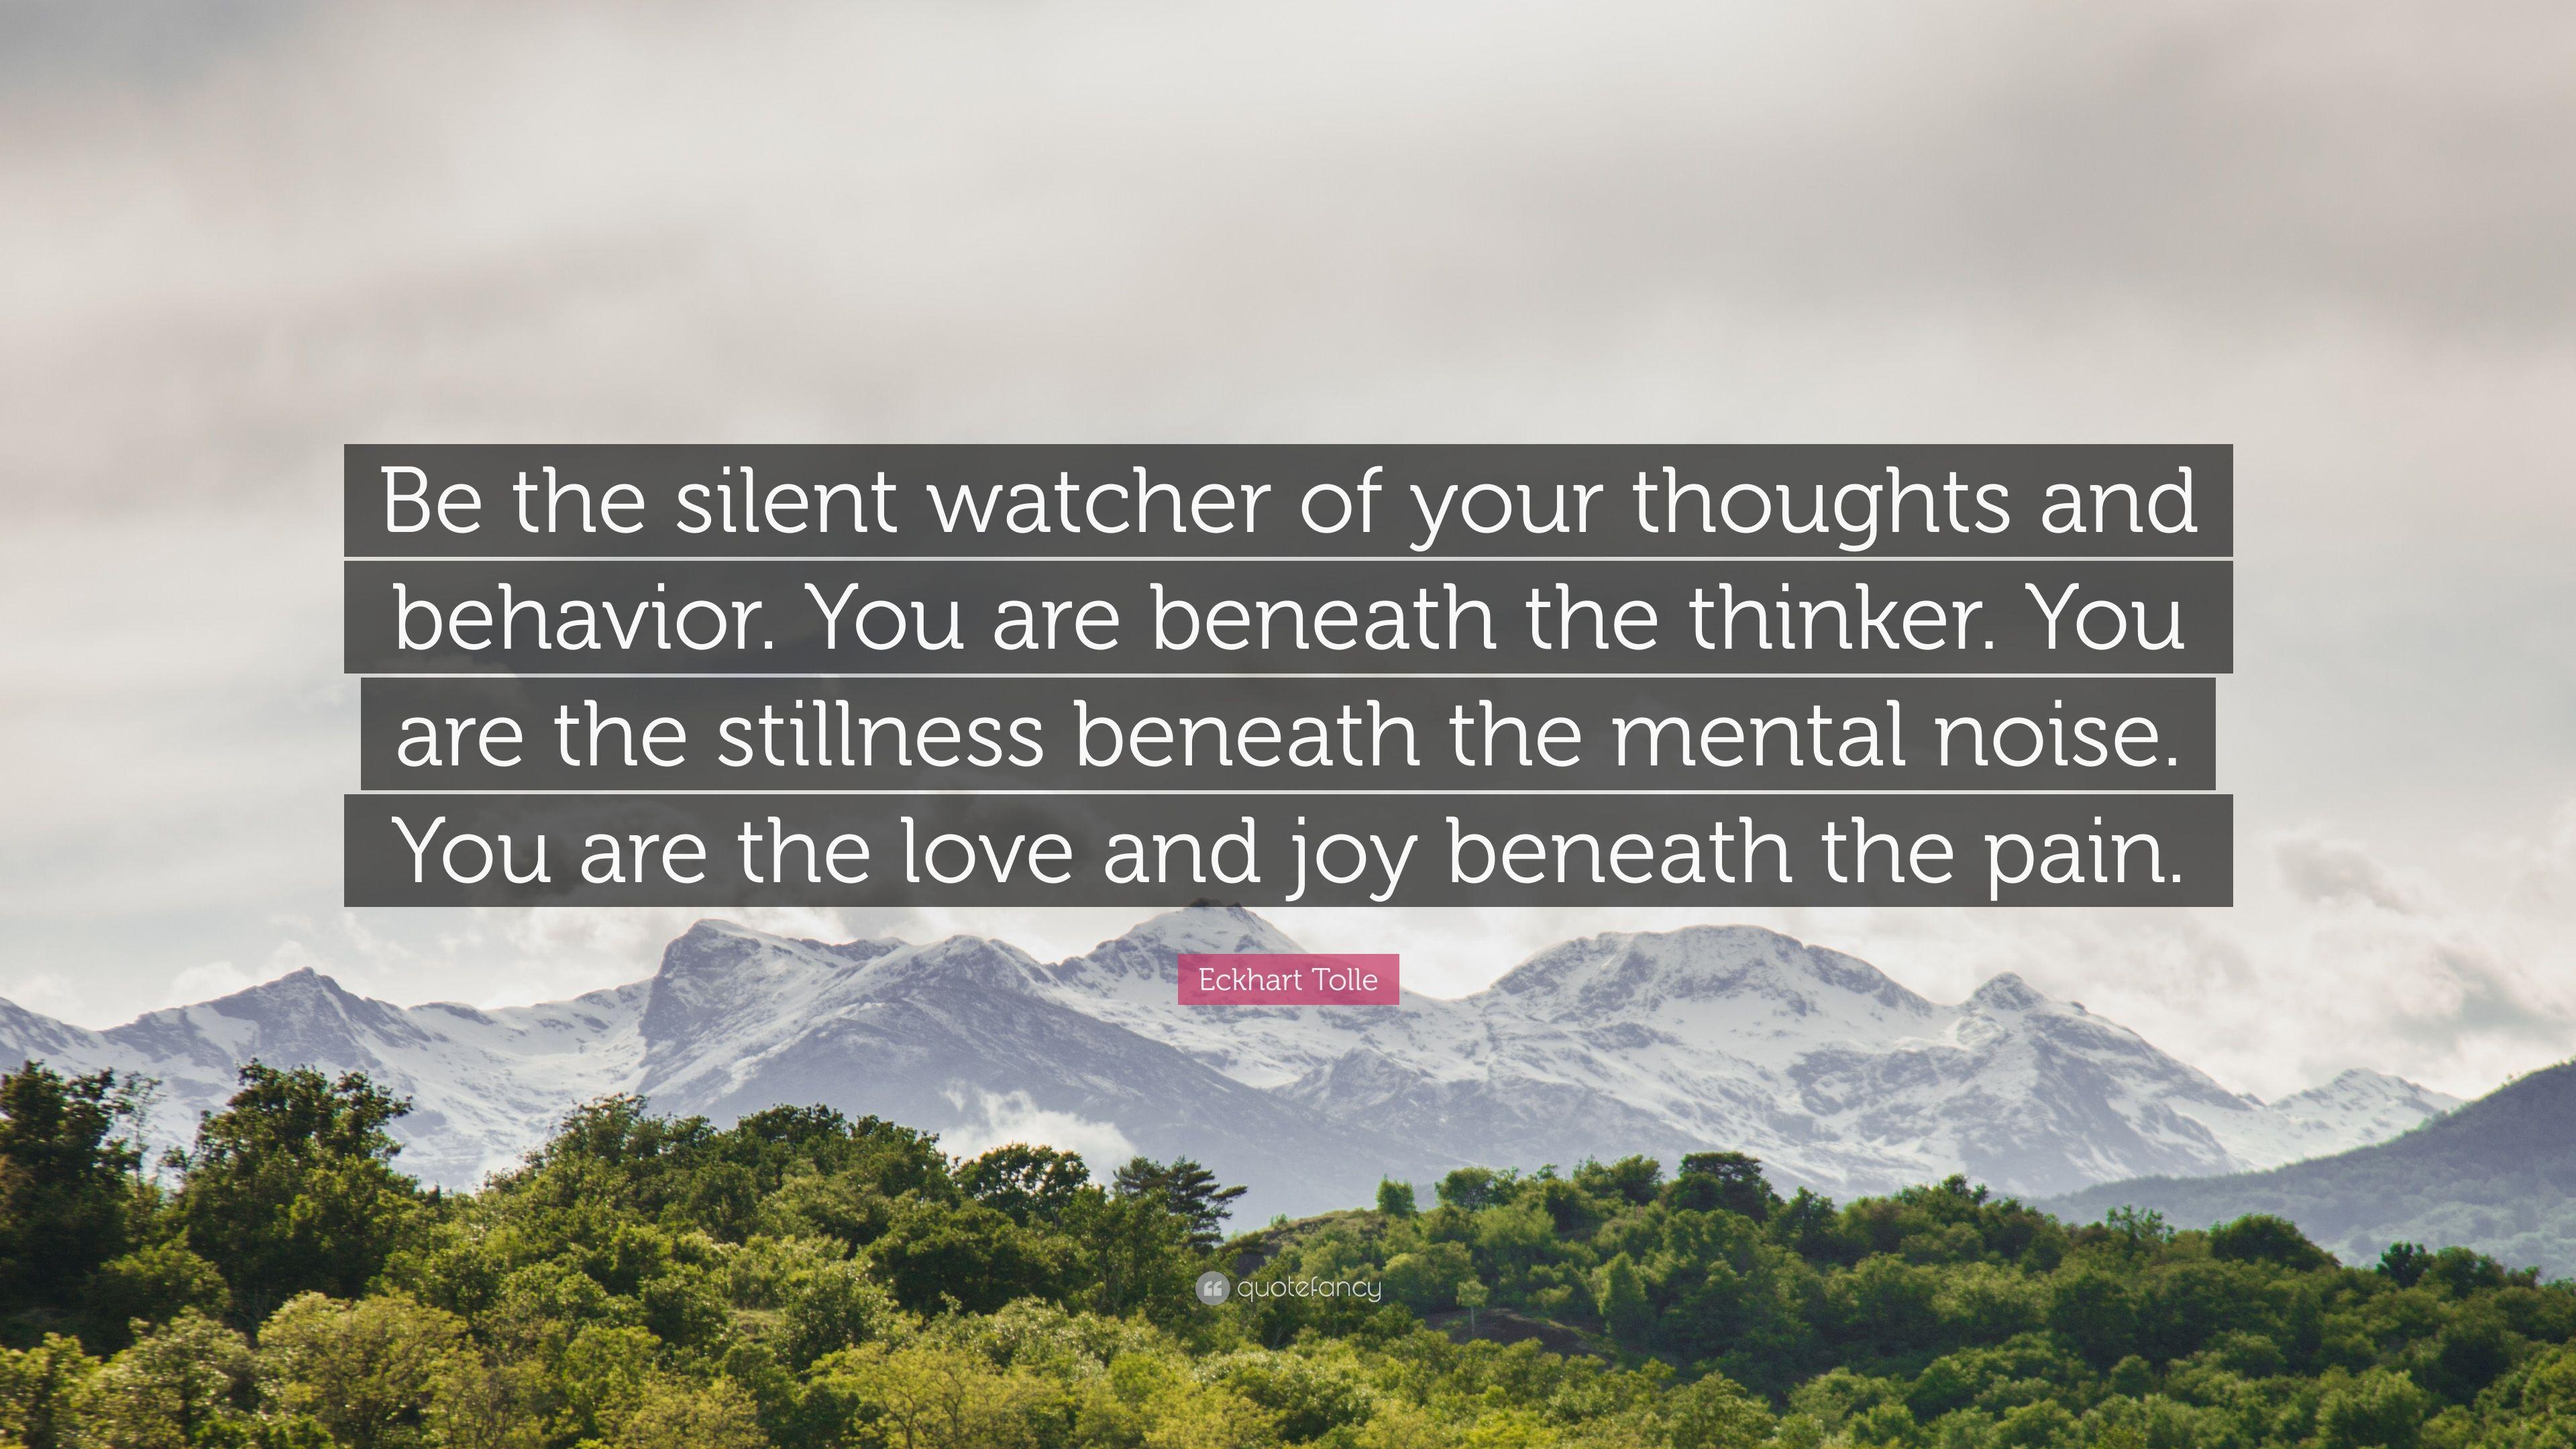 Mindfulness Quotes (40 wallpaper)